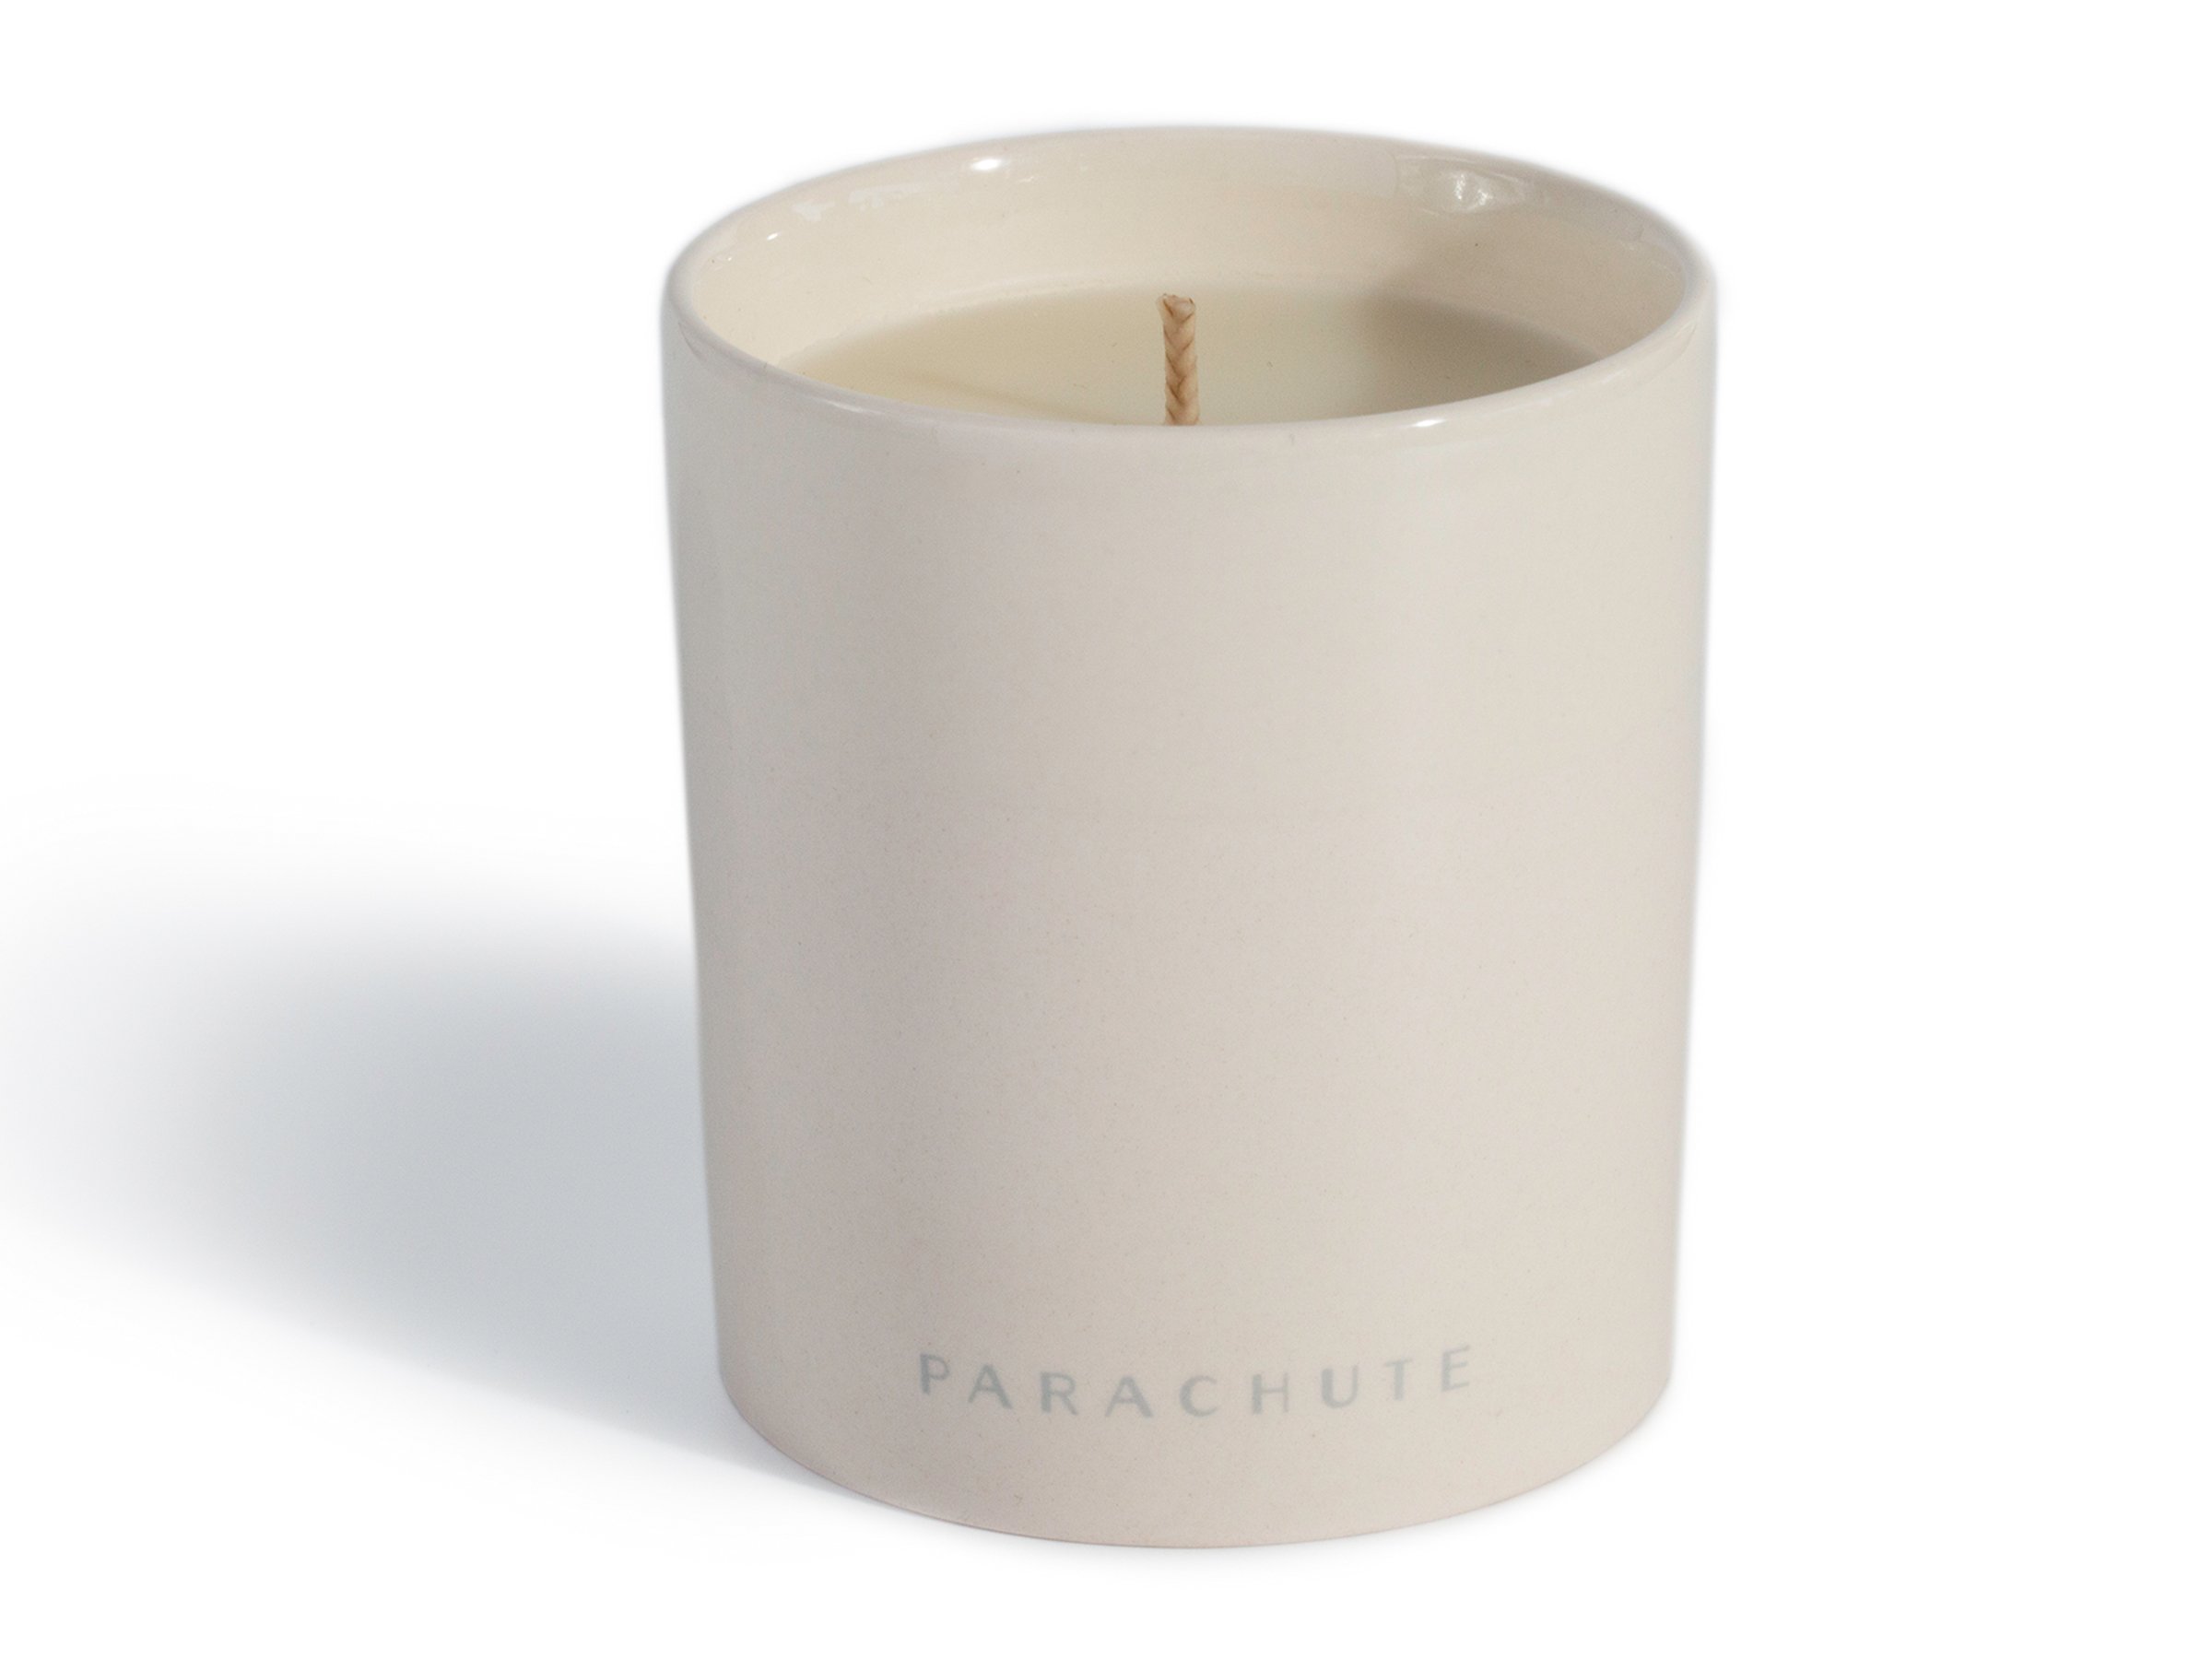 Scented Candle - Soy-based Wax with Essential Oil | Parachute Home